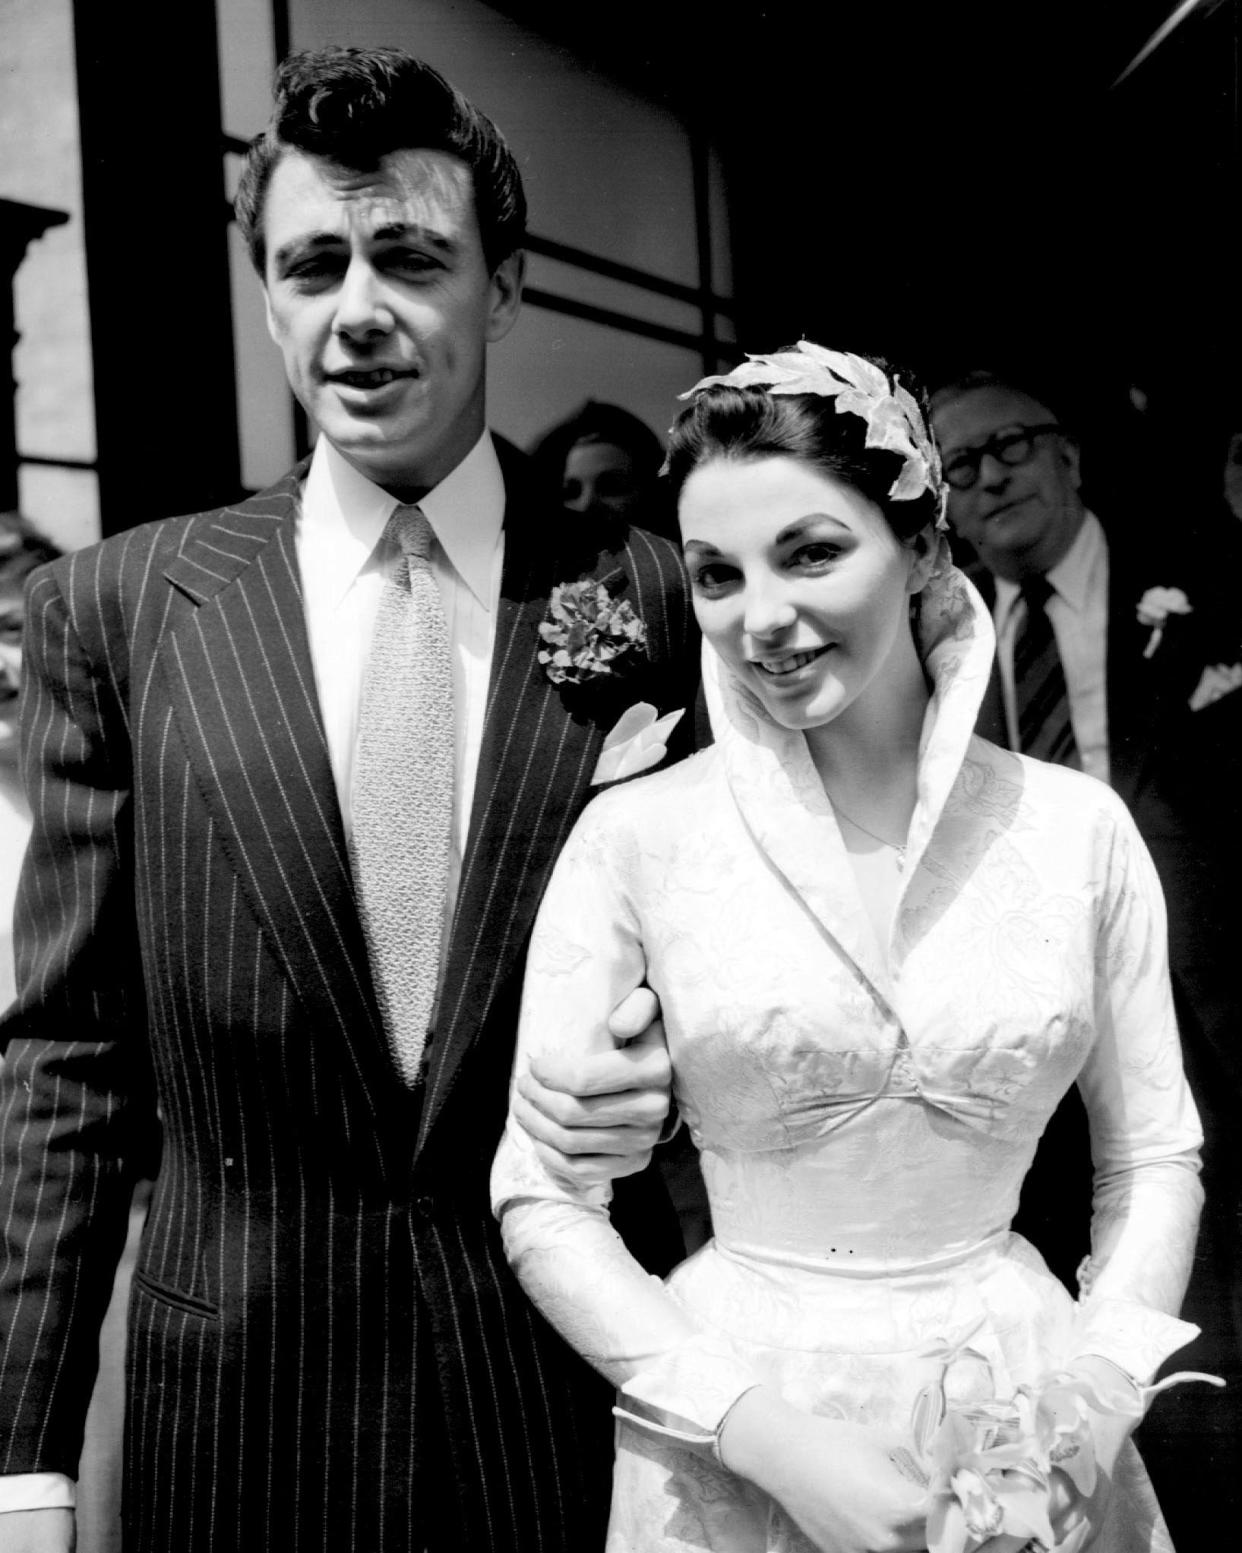 Actor Maxwell Reed and his bride actress Joan Collins after their wedding at Caxton Hall Register Office, London.  *  17/2/02: Ms Collins will be walking down the aisle for the fifth time at a secretive wedding ceremony at Claridges Hotel in central London. The evergreen 68-year-old star will wed theatre boss Percy Gibson, 36, in front of 175 guests in the ballroom of the famous hotel at 5pm this afternoon. Her fifth wedding is due to be no understated affair and she is expected to wear a pink silk dress by Hollywood designer Nolan Miller who designed the costumes for Dynasty. Details of the eagerly awaited wedding will be kept under wraps because of an exclusive magazine deal British magazine OK! which could reportedly earn the couple up to  2 million.   (Photo by PA Images via Getty Images)